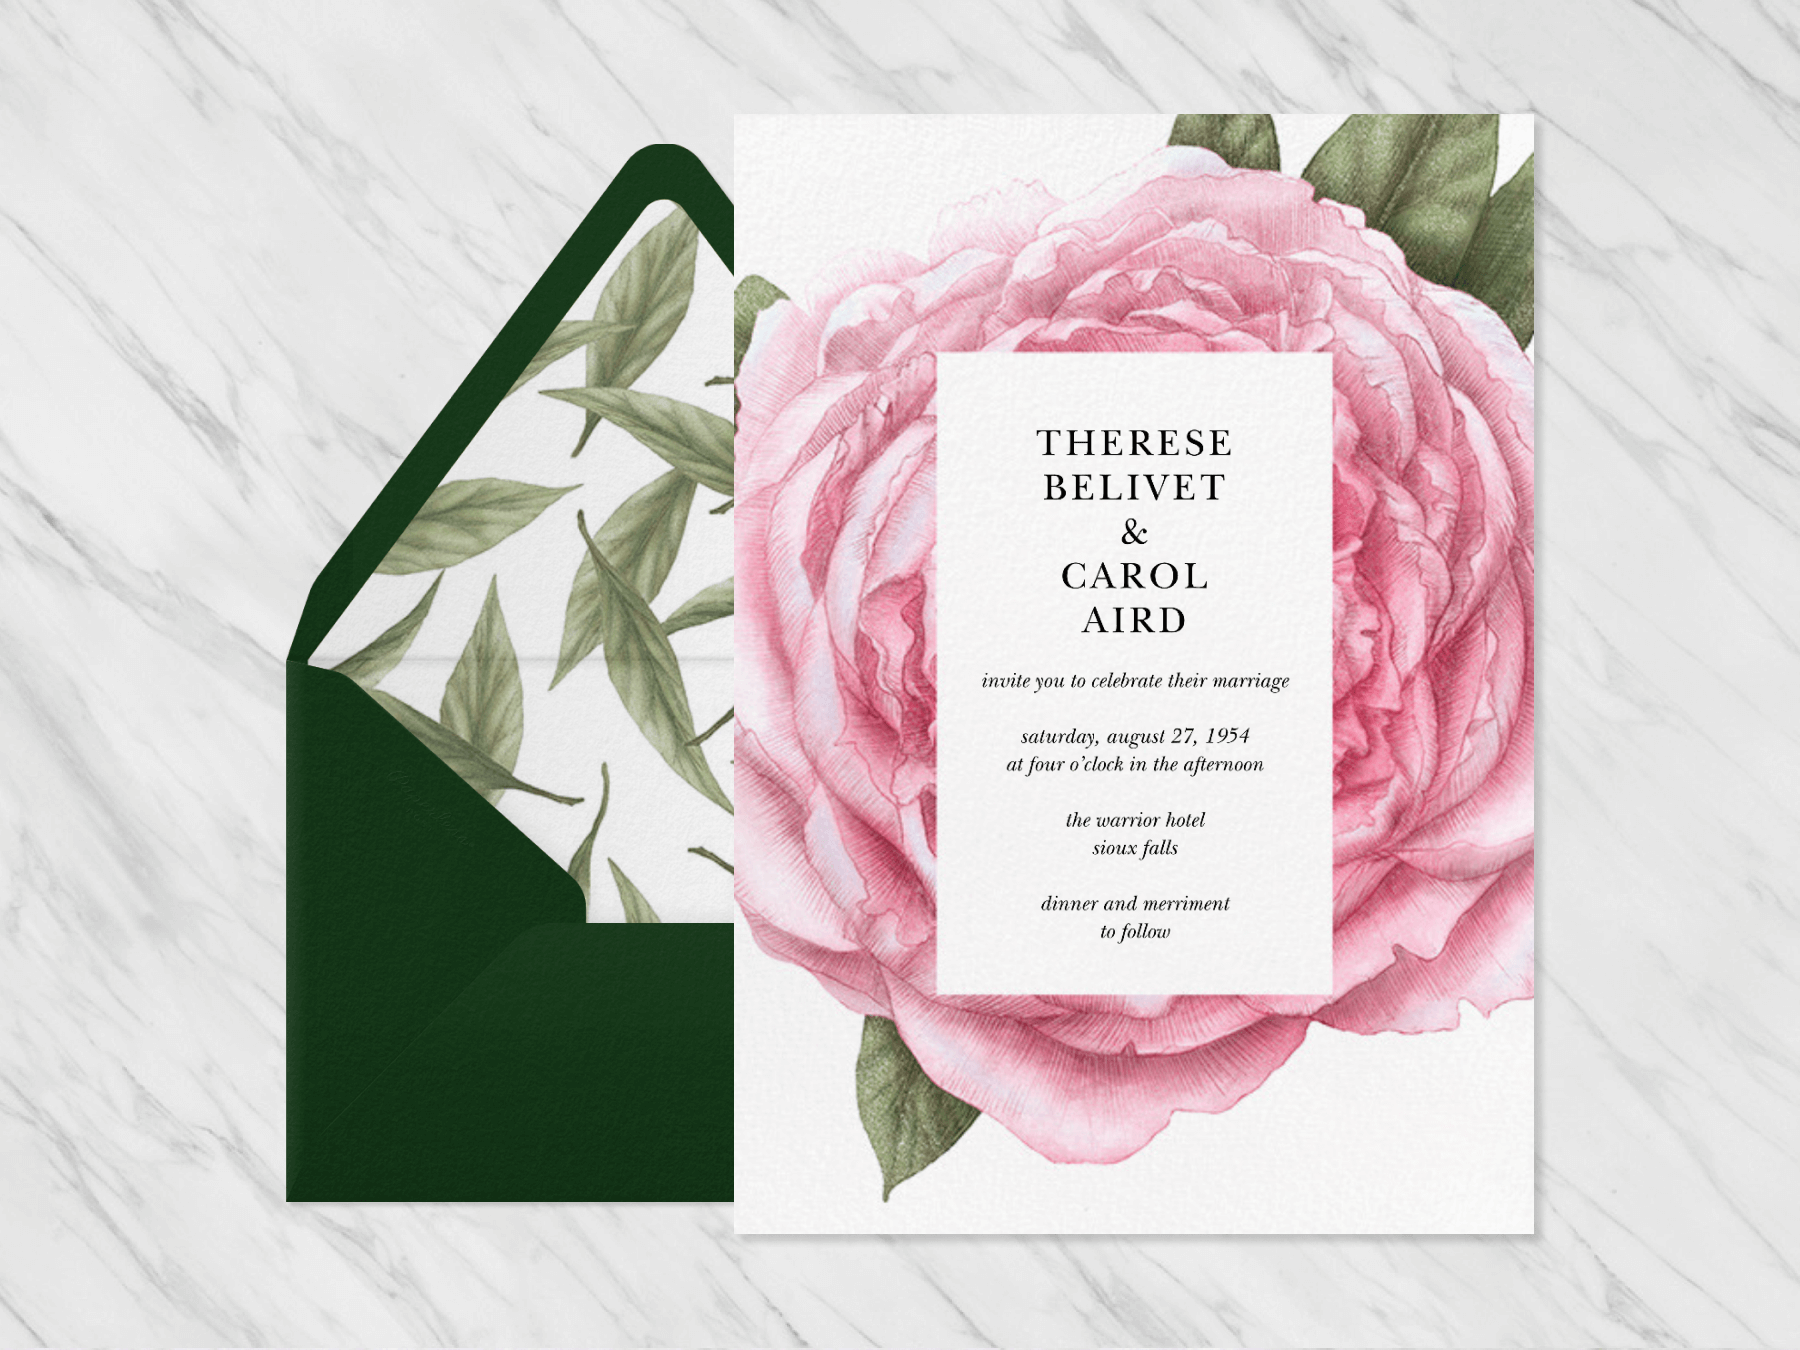 A wedding invitation with a large pink flower in the center beside a green envelope with leafy liner on a marble background.